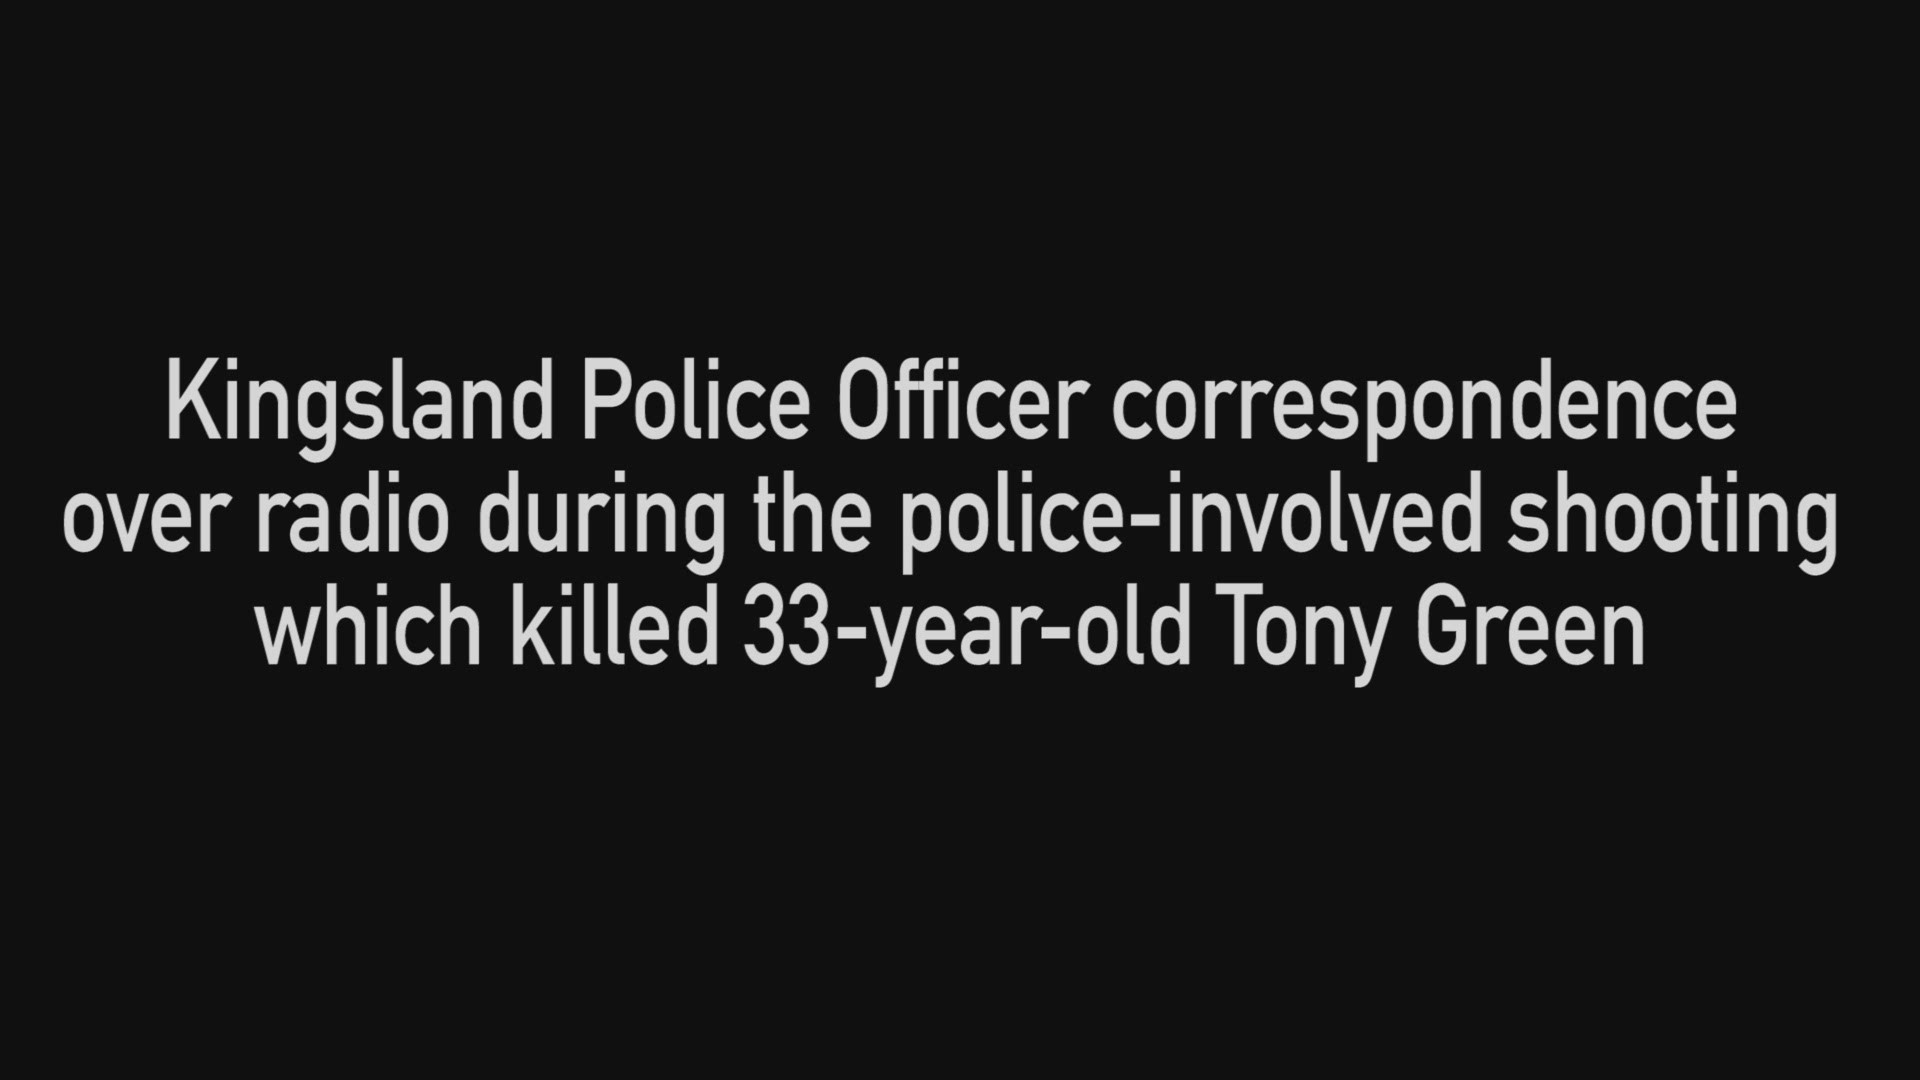 Kingsland Police released raw audio of radio correspondence between officers during the traffic stop and ensuing chase and altercation which ended in police shooting and killing 33-year-old Tony Green.